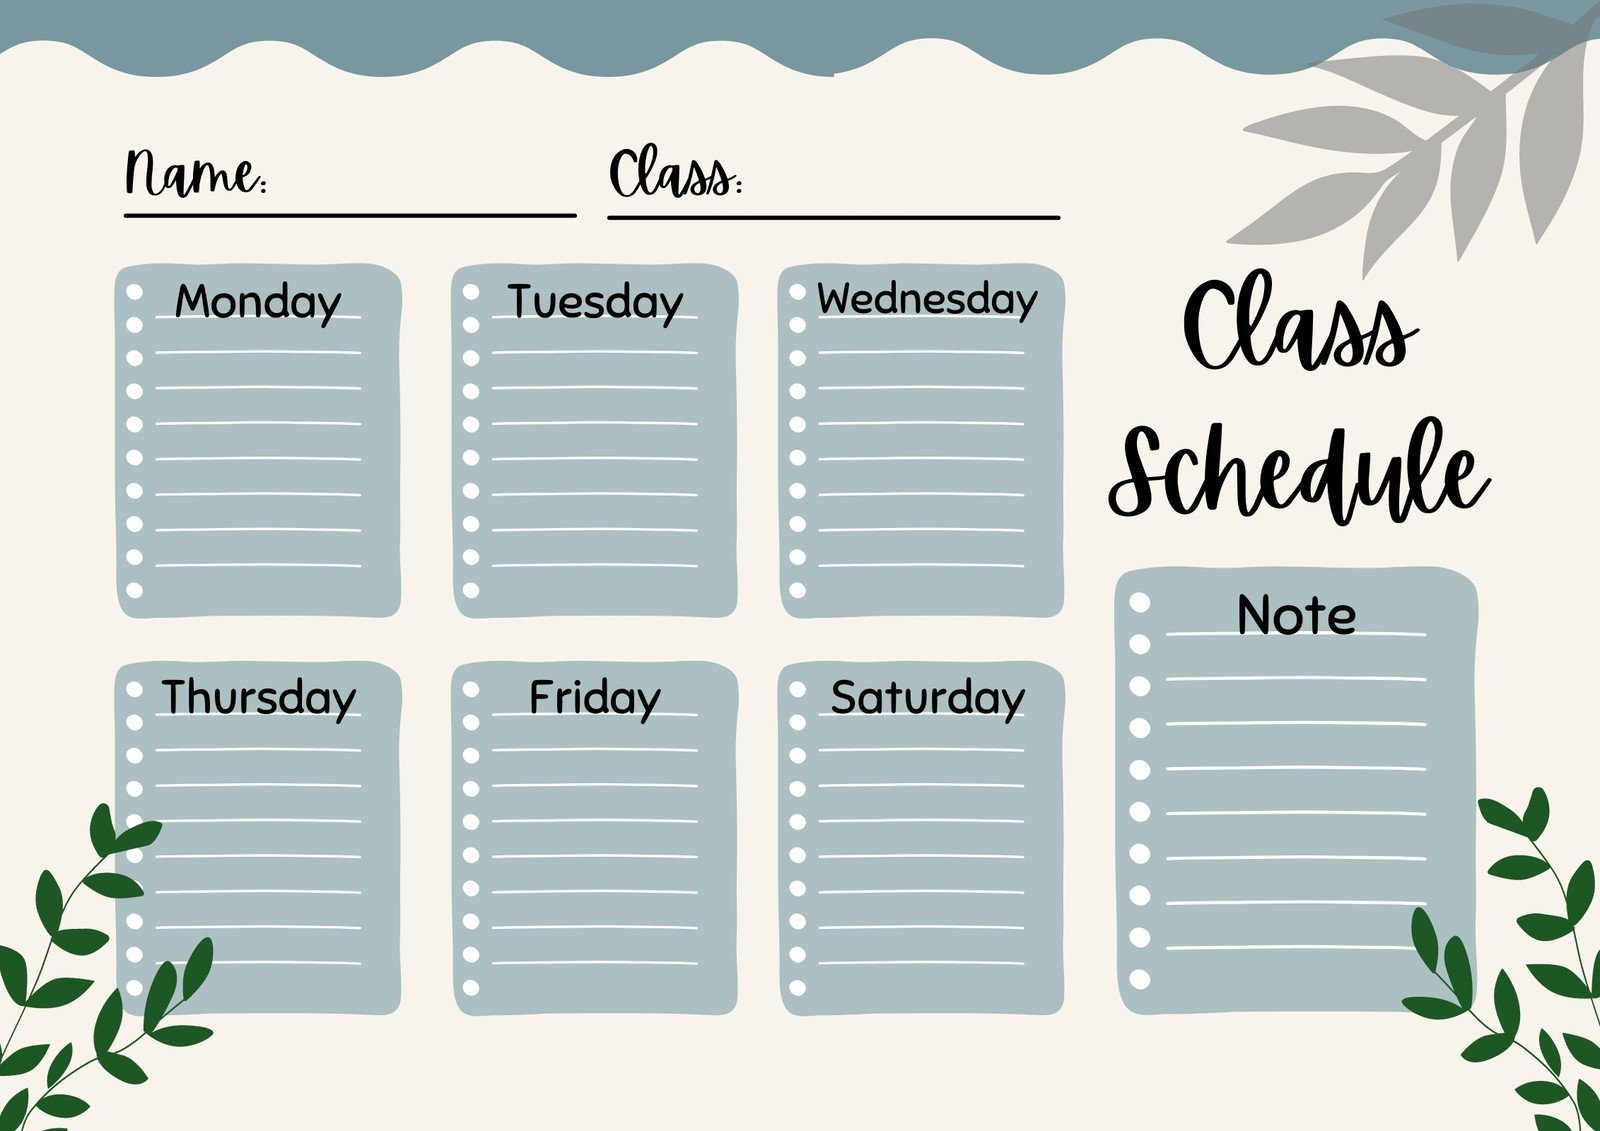 free-printable-class-schedule-templates-to-customize-canva